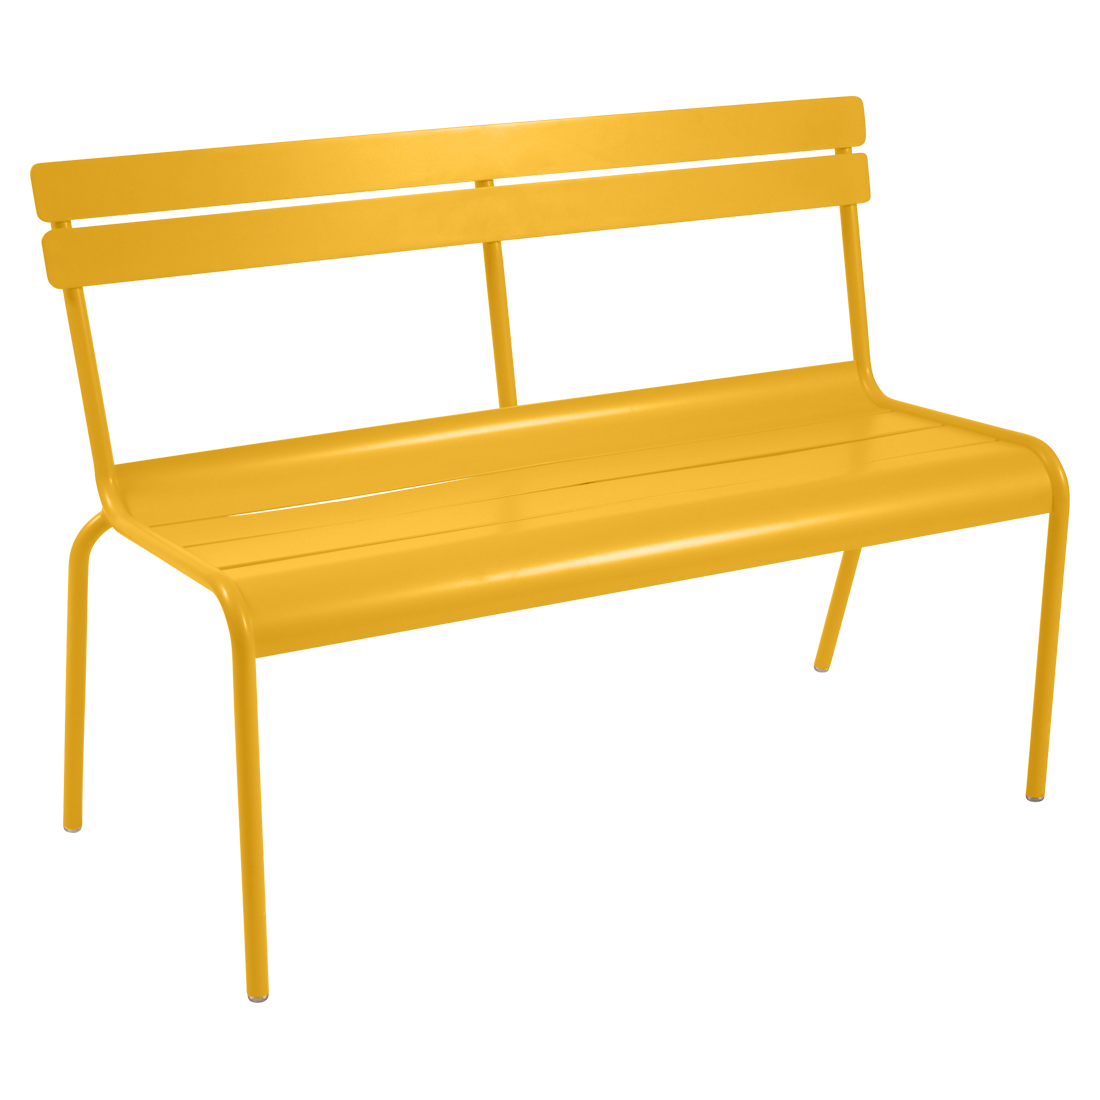 LUXEMBOURG / 2/3 SEATER BENCH WITH BACKREST